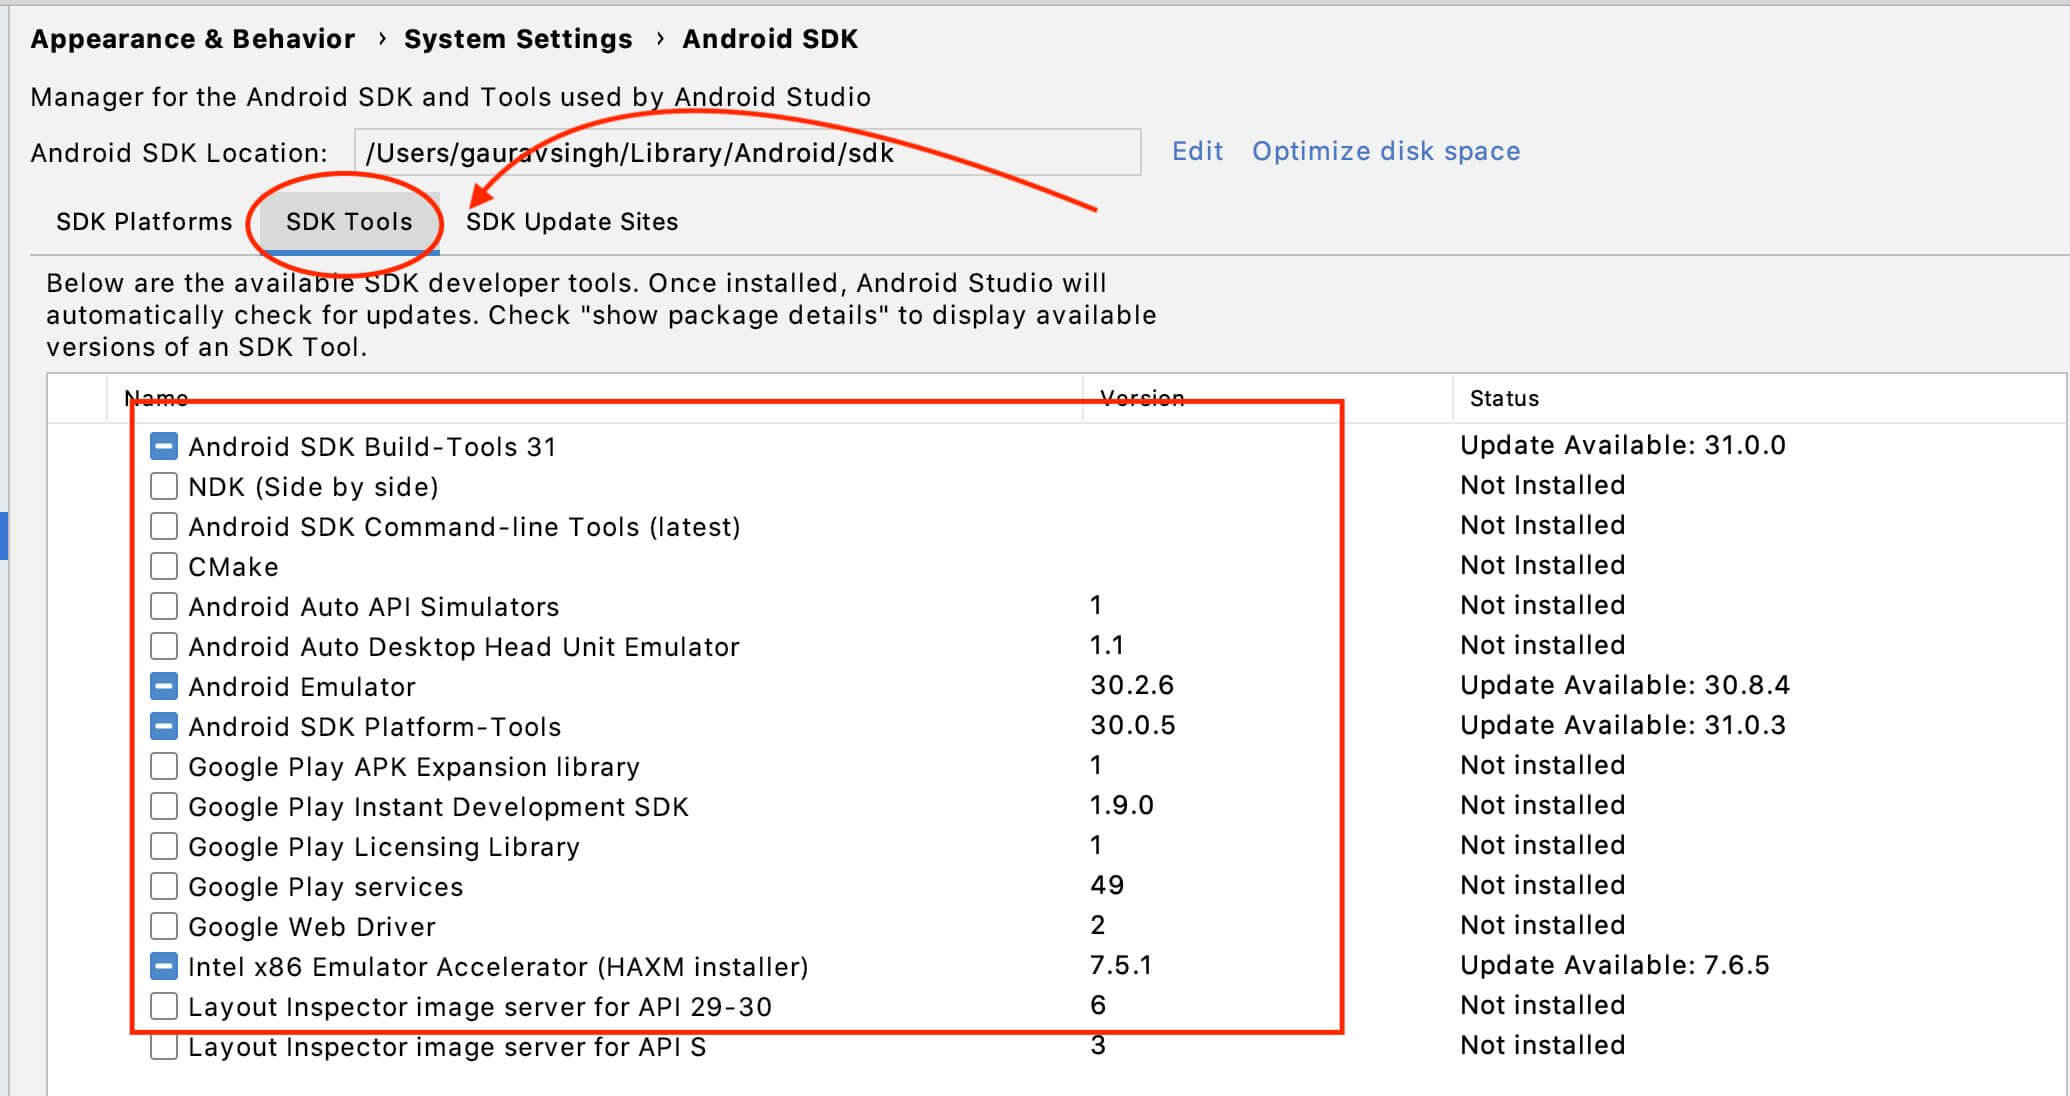 Shows SDK Tools in android studio